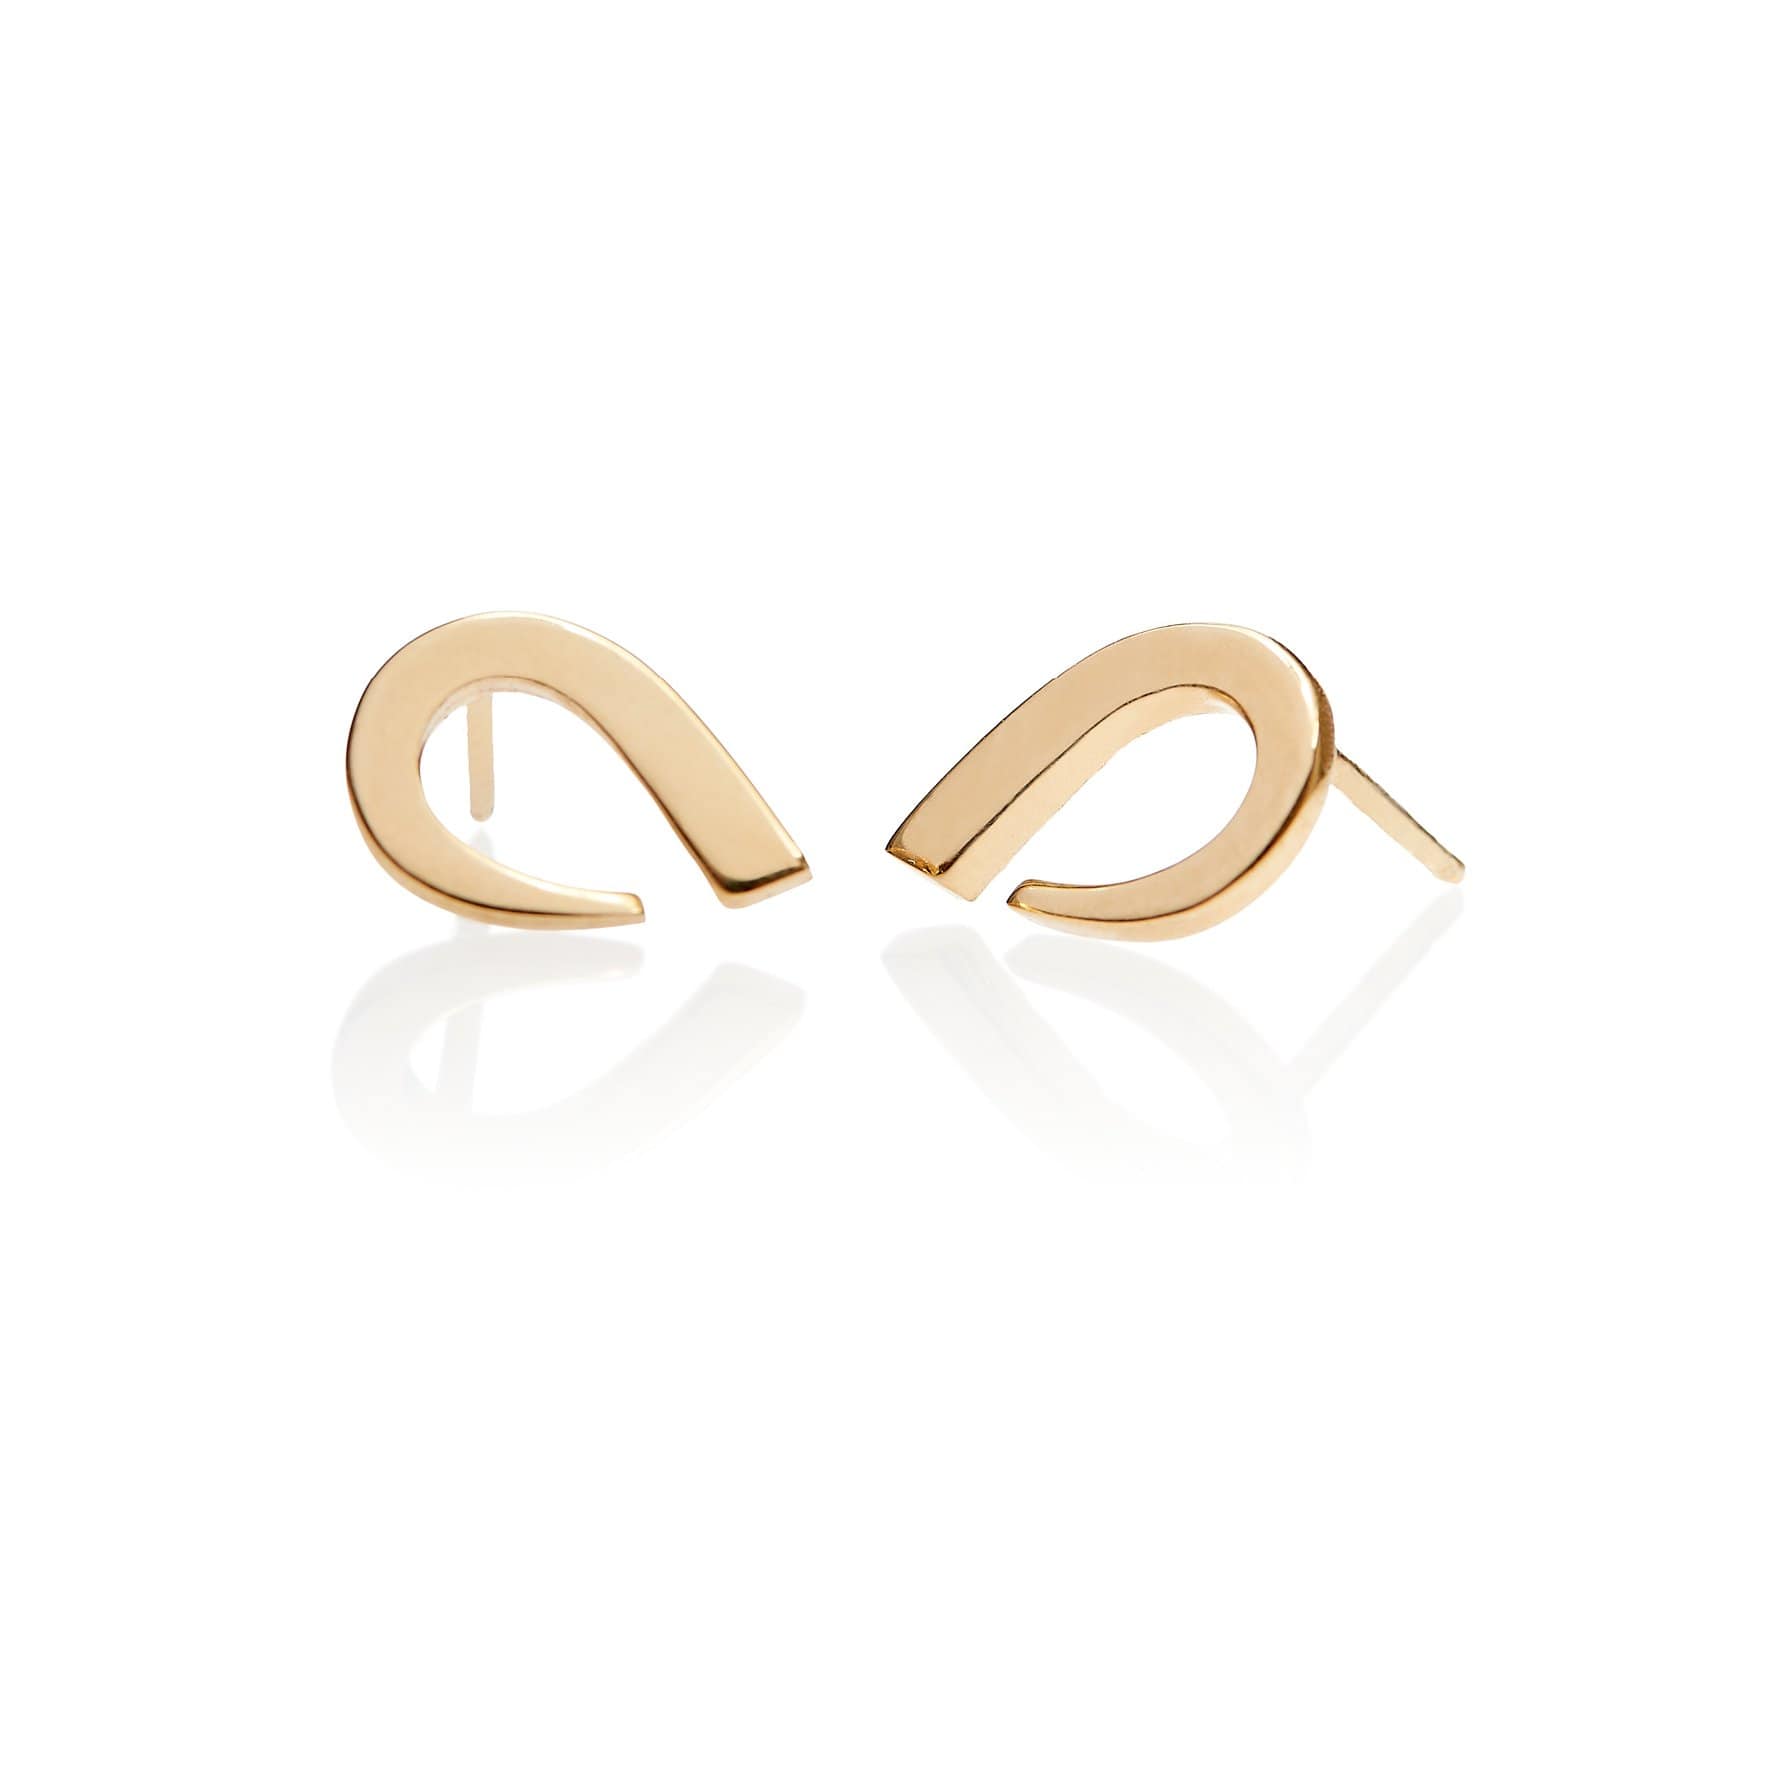 Rounded earrings crafted from 14k gold in size medium